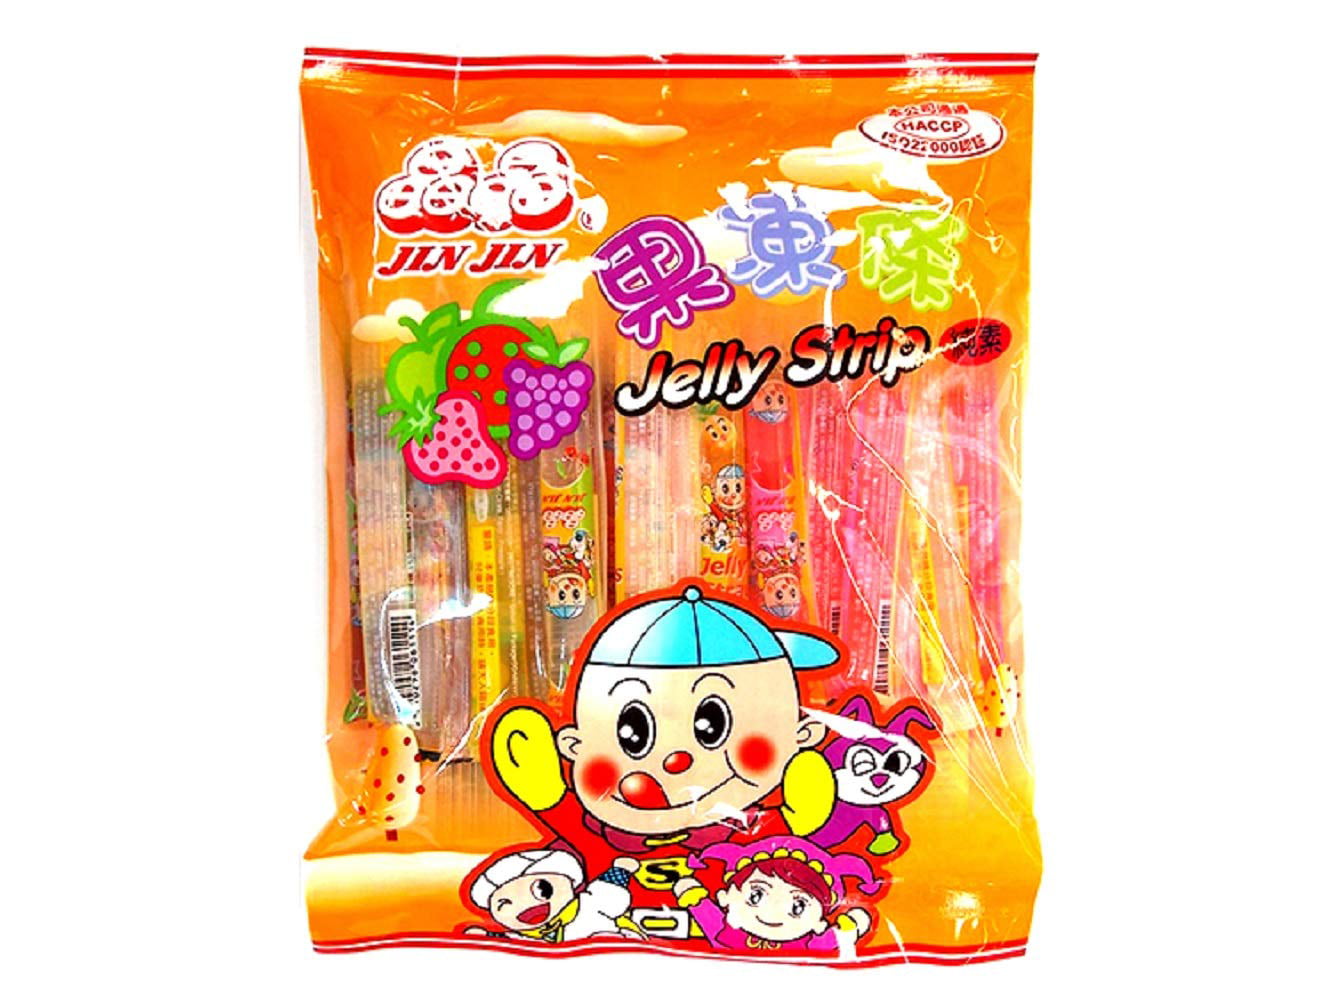 Jin Jin Fruit Jelly Filled Strip Straws Candy - Many Flavors! (2 Pack)